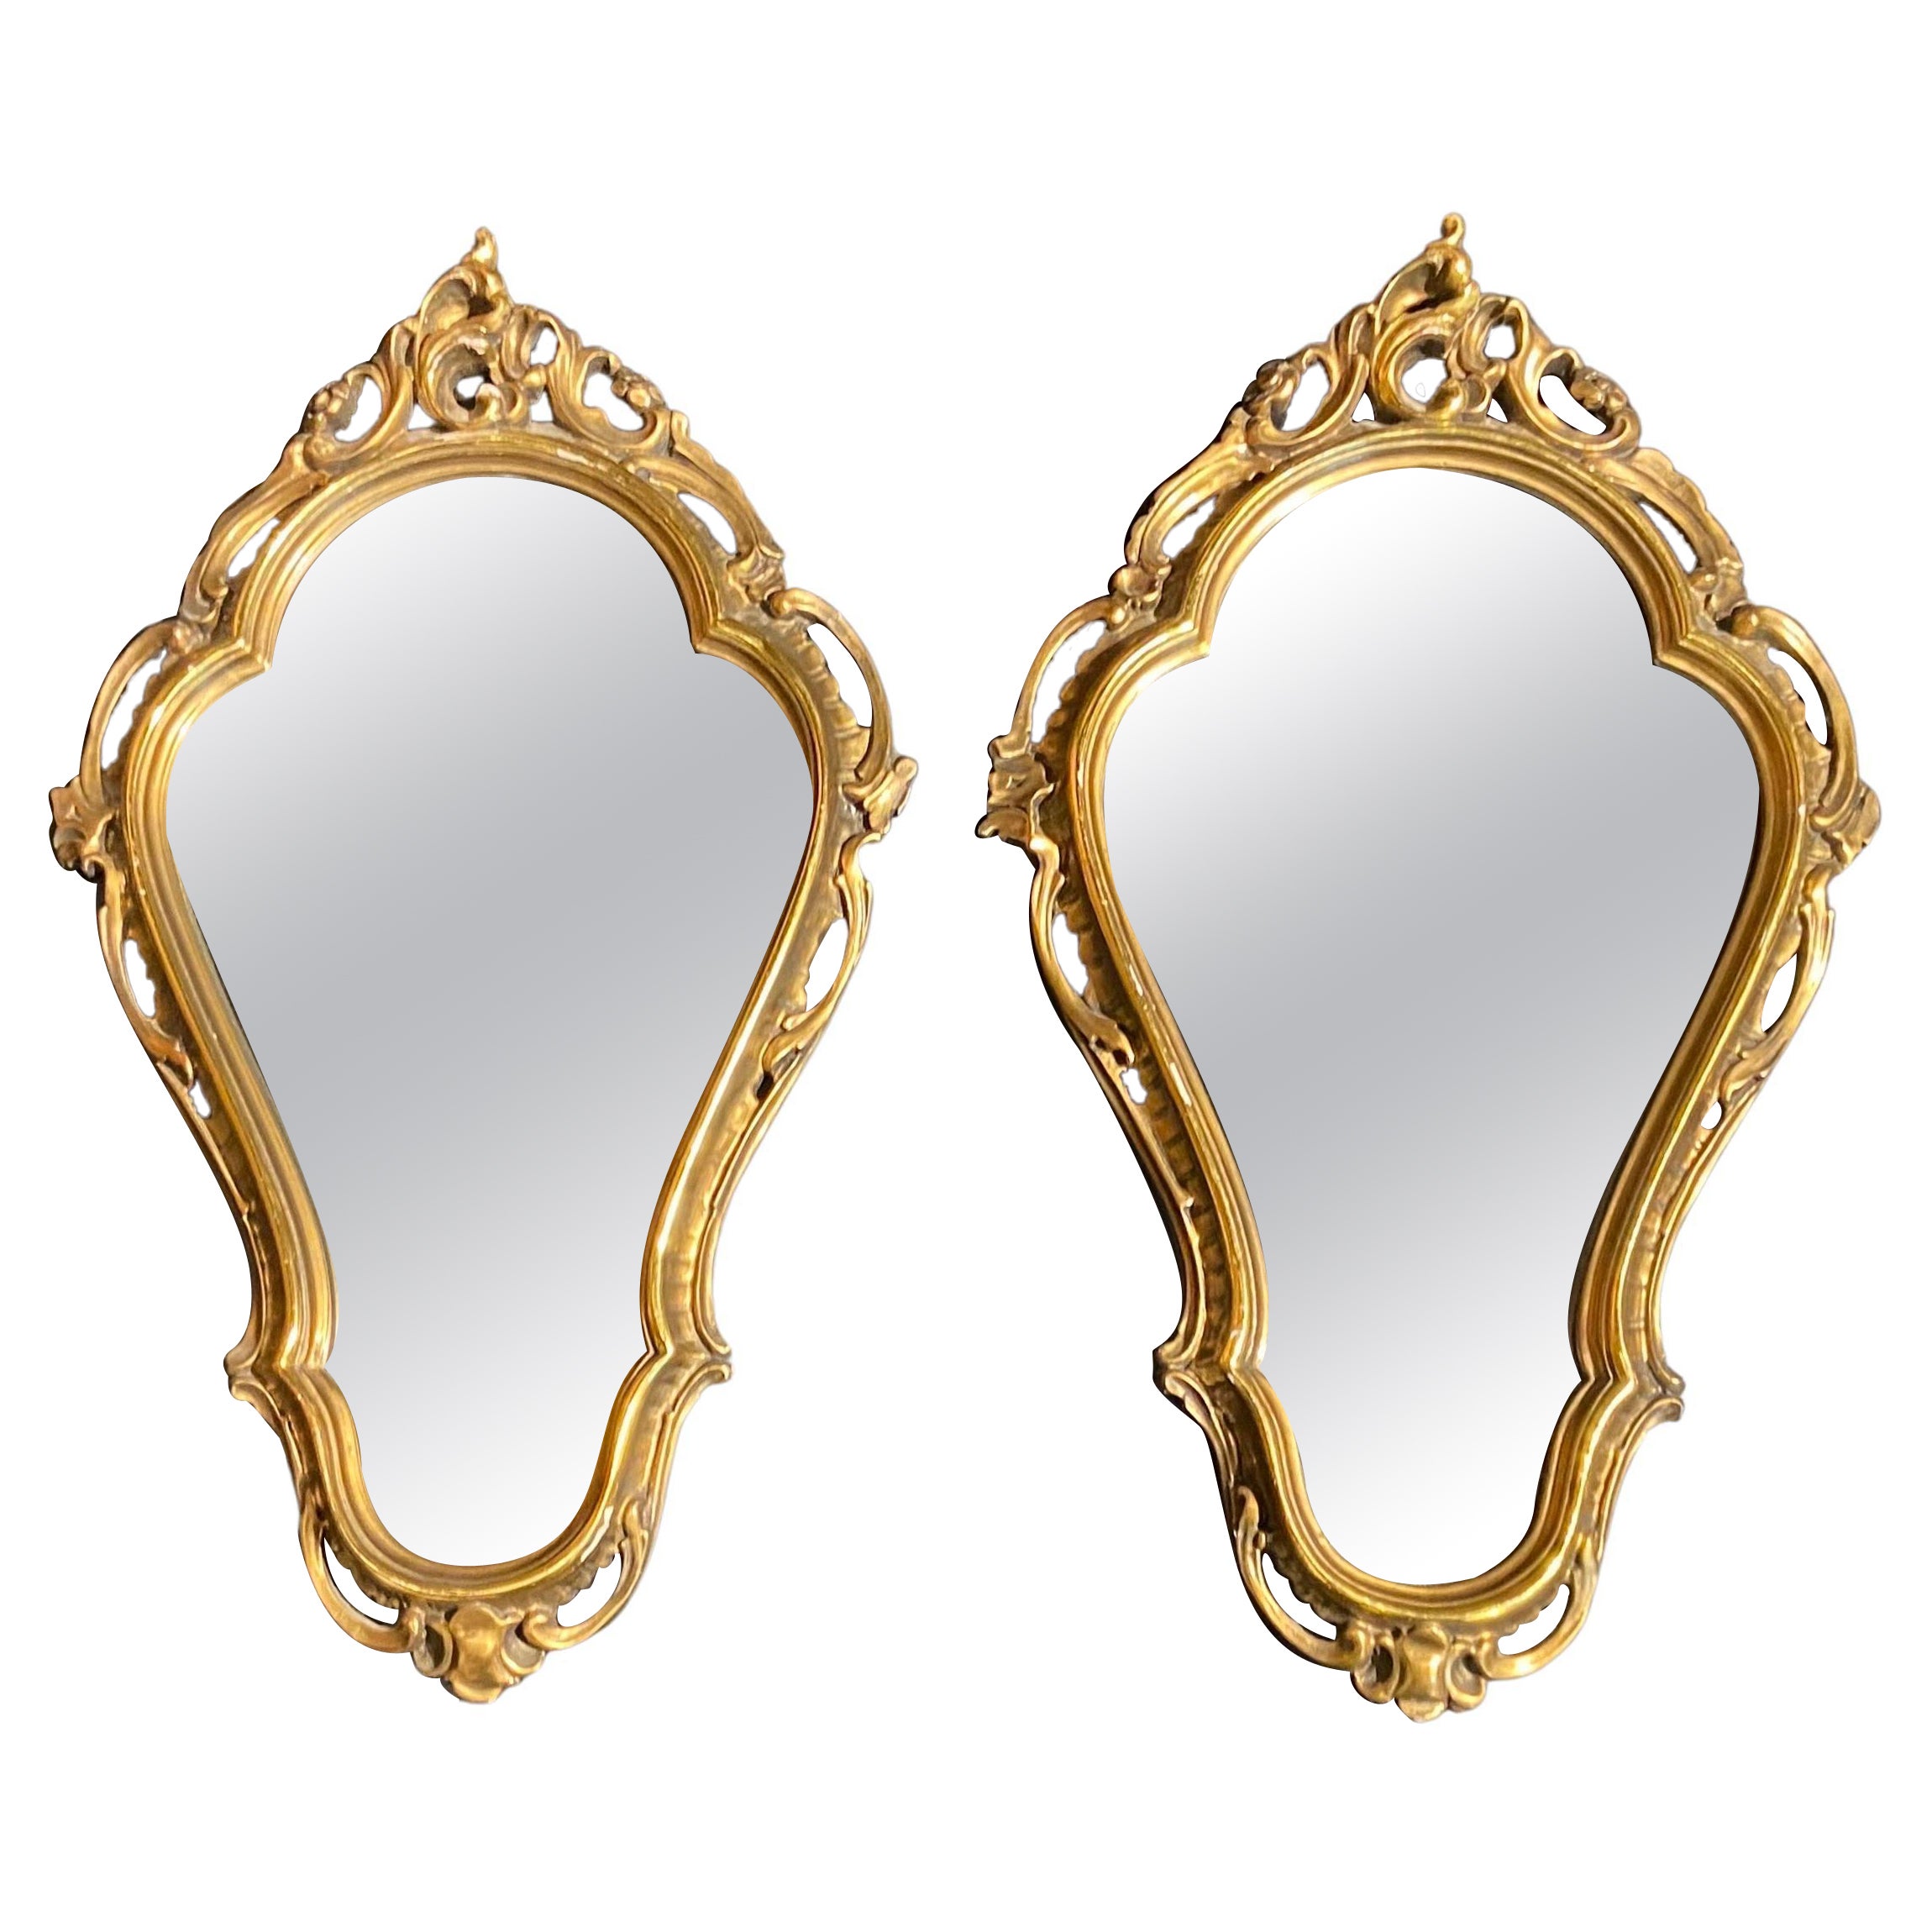 20th Century French Pair of Hand Carved and Gilt Wood Wall Mirrors